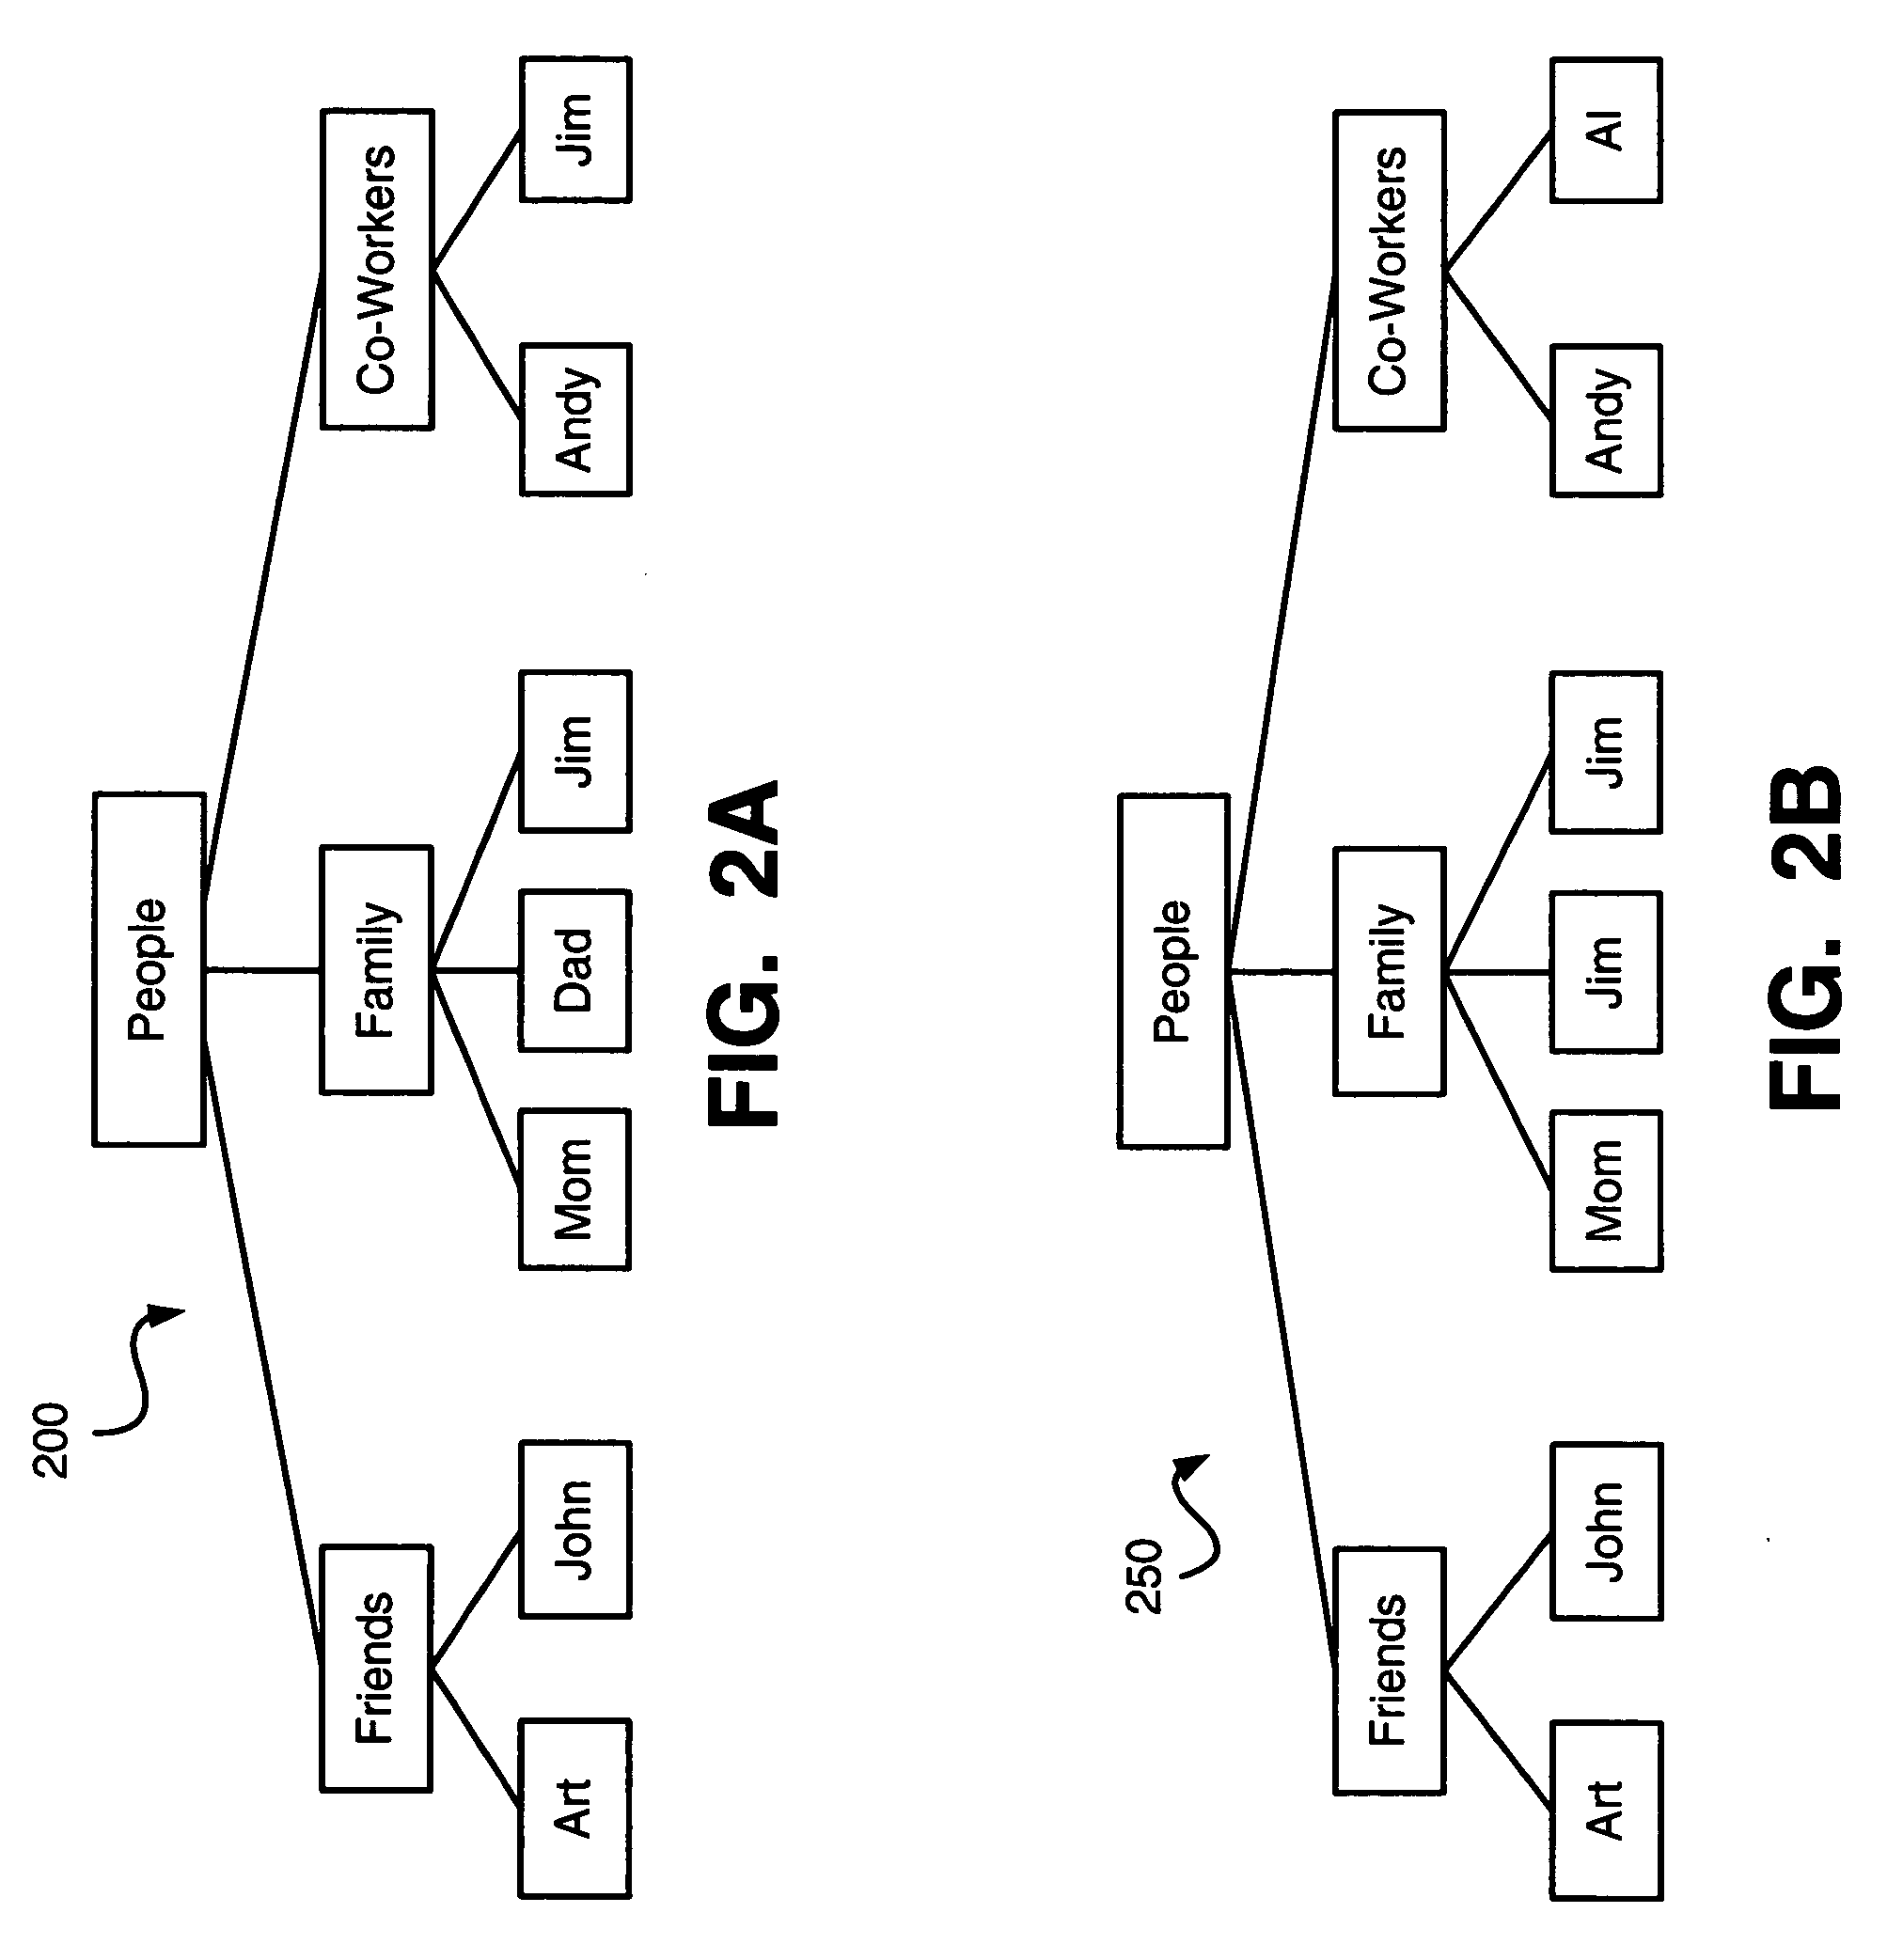 Systems, methods, and user interfaces for storing, searching, navigating, and retrieving electronic information